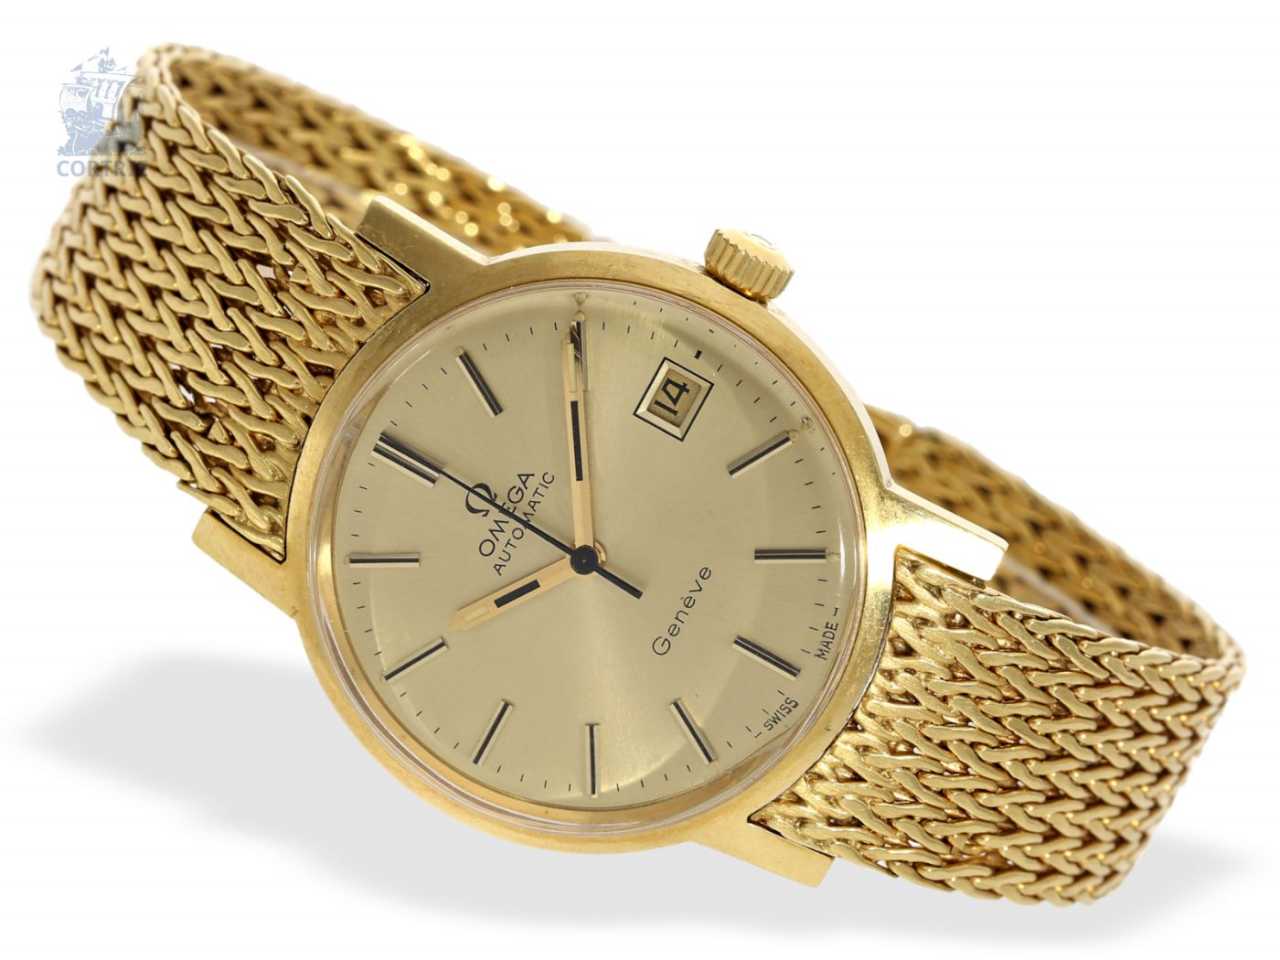 auction-watch-very-high-quality-vintage-men-s-watch-in-18k-gold-omega